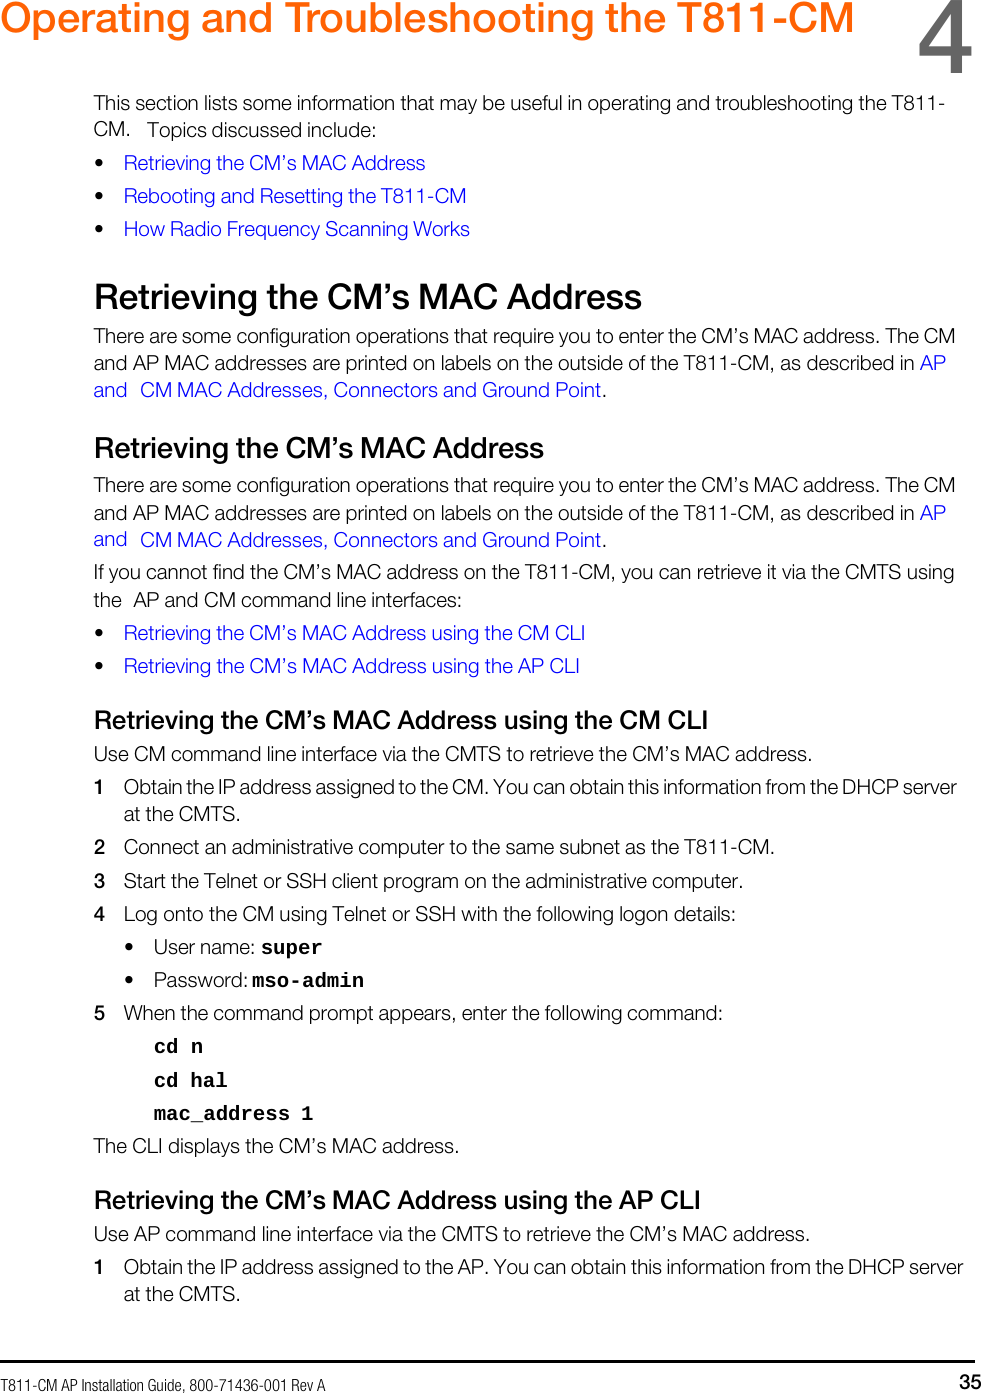 T811-CM AP Installation Guide, 800-71436-001 Rev A 35     Operating and Troubleshooting the T811-CM  4  This section lists some information that may be useful in operating and troubleshooting the T811-CM. Topics discussed include: • Retrieving the CM’s MAC Address • Rebooting and Resetting the T811-CM • How Radio Frequency Scanning Works  Retrieving the CM’s MAC Address There are some configuration operations that require you to enter the CM’s MAC address. The CM and AP MAC addresses are printed on labels on the outside of the T811-CM, as described in AP and CM MAC Addresses, Connectors and Ground Point.  Retrieving the CM’s MAC Address There are some configuration operations that require you to enter the CM’s MAC address. The CM and AP MAC addresses are printed on labels on the outside of the T811-CM, as described in AP and CM MAC Addresses, Connectors and Ground Point. If you cannot find the CM’s MAC address on the T811-CM, you can retrieve it via the CMTS using the AP and CM command line interfaces: • Retrieving the CM’s MAC Address using the CM CLI • Retrieving the CM’s MAC Address using the AP CLI  Retrieving the CM’s MAC Address using the CM CLI Use CM command line interface via the CMTS to retrieve the CM’s MAC address. 1 Obtain the IP address assigned to the CM. You can obtain this information from the DHCP server at the CMTS. 2 Connect an administrative computer to the same subnet as the T811-CM. 3 Start the Telnet or SSH client program on the administrative computer. 4 Log onto the CM using Telnet or SSH with the following logon details: • User name: super • Password: mso-admin 5 When the command prompt appears, enter the following command: cd n cd hal mac_address 1 The CLI displays the CM’s MAC address.  Retrieving the CM’s MAC Address using the AP CLI Use AP command line interface via the CMTS to retrieve the CM’s MAC address. 1 Obtain the IP address assigned to the AP. You can obtain this information from the DHCP server at the CMTS. 